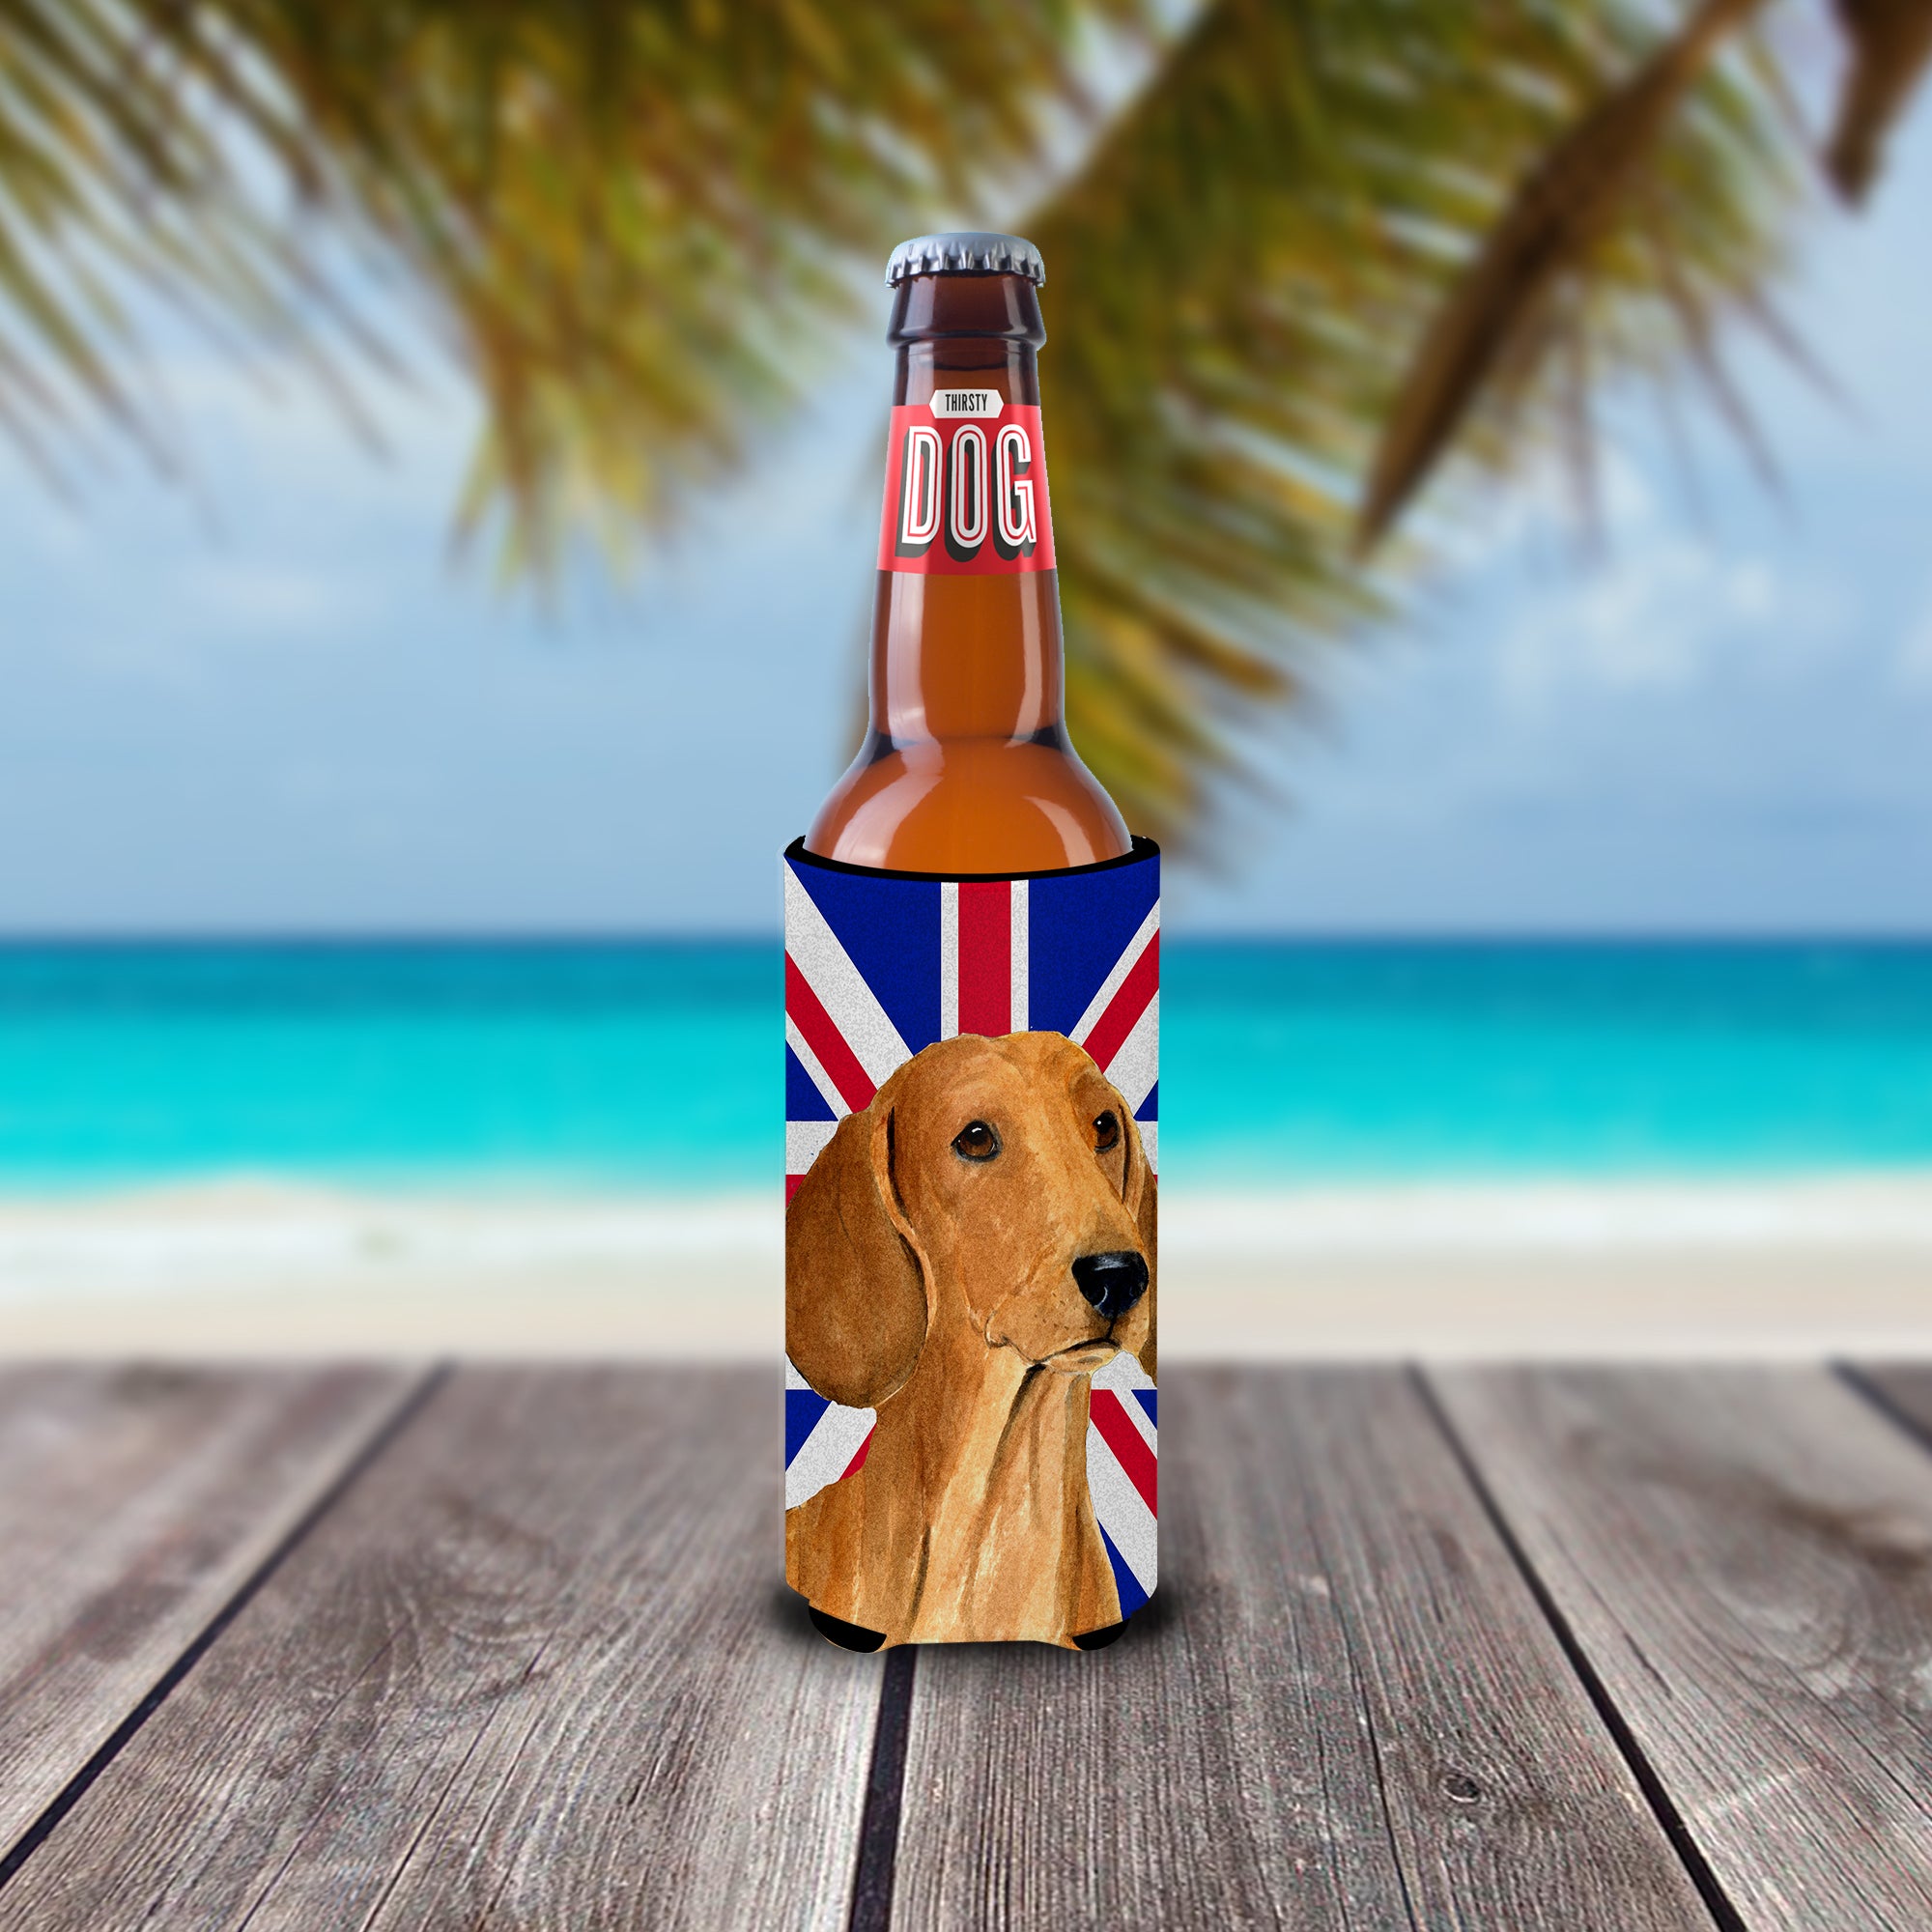 Dachshund with English Union Jack British Flag Ultra Beverage Insulators for slim cans SS4929MUK.